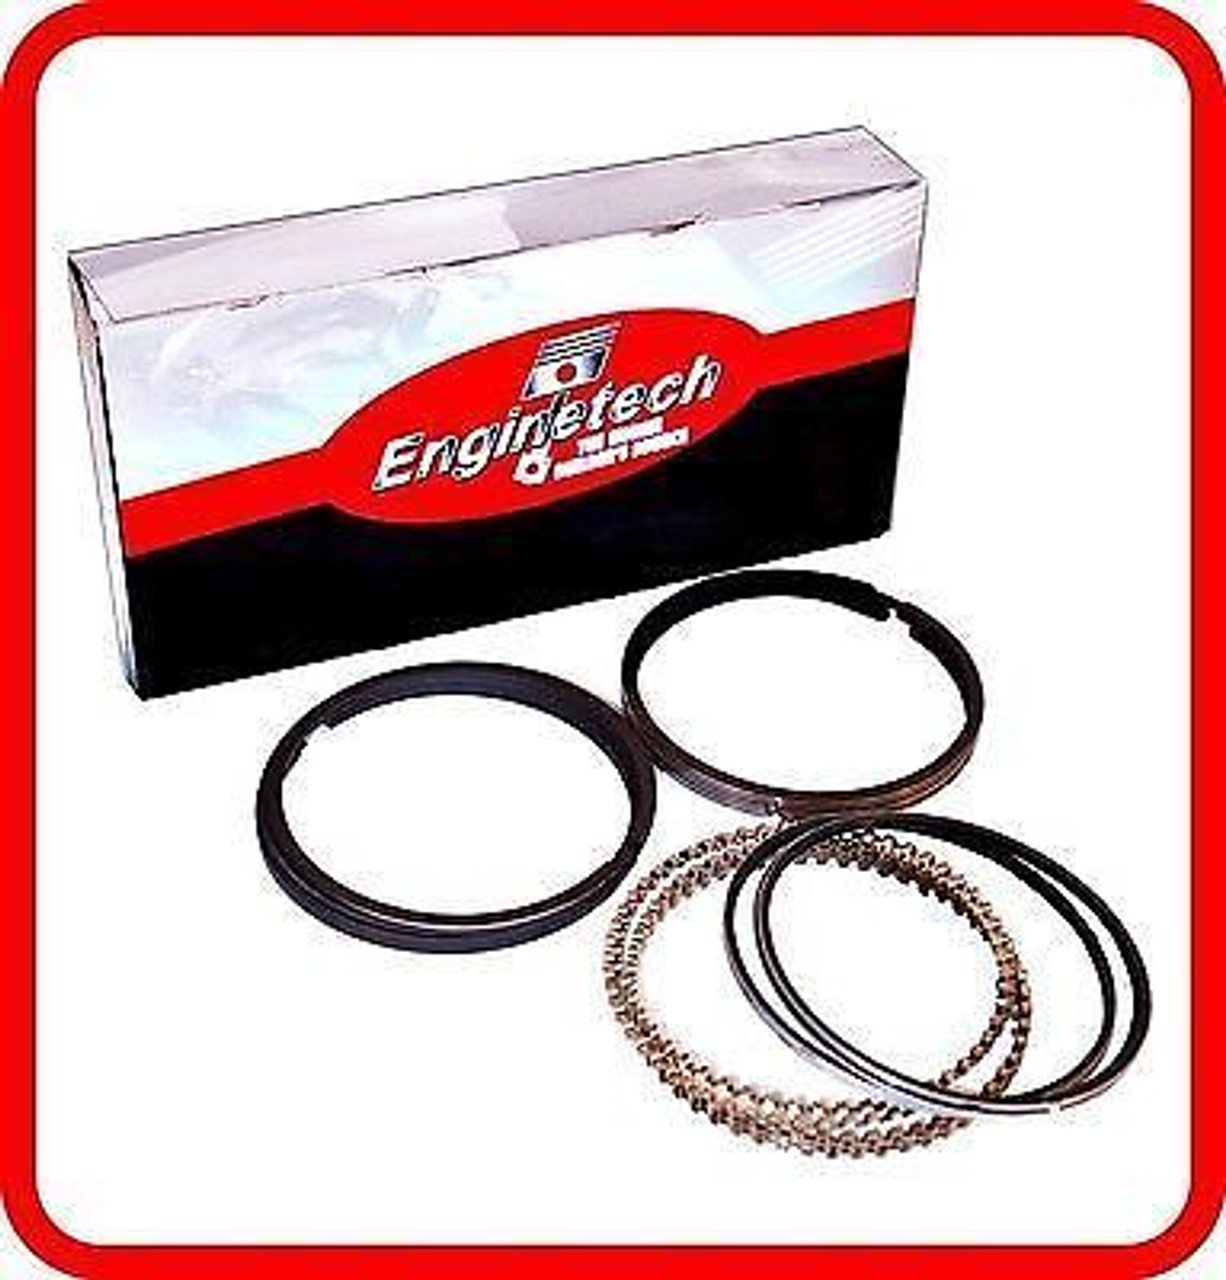 2010 Ford Mustang 4.6L Engine Piston Ring Set S90228 -1348